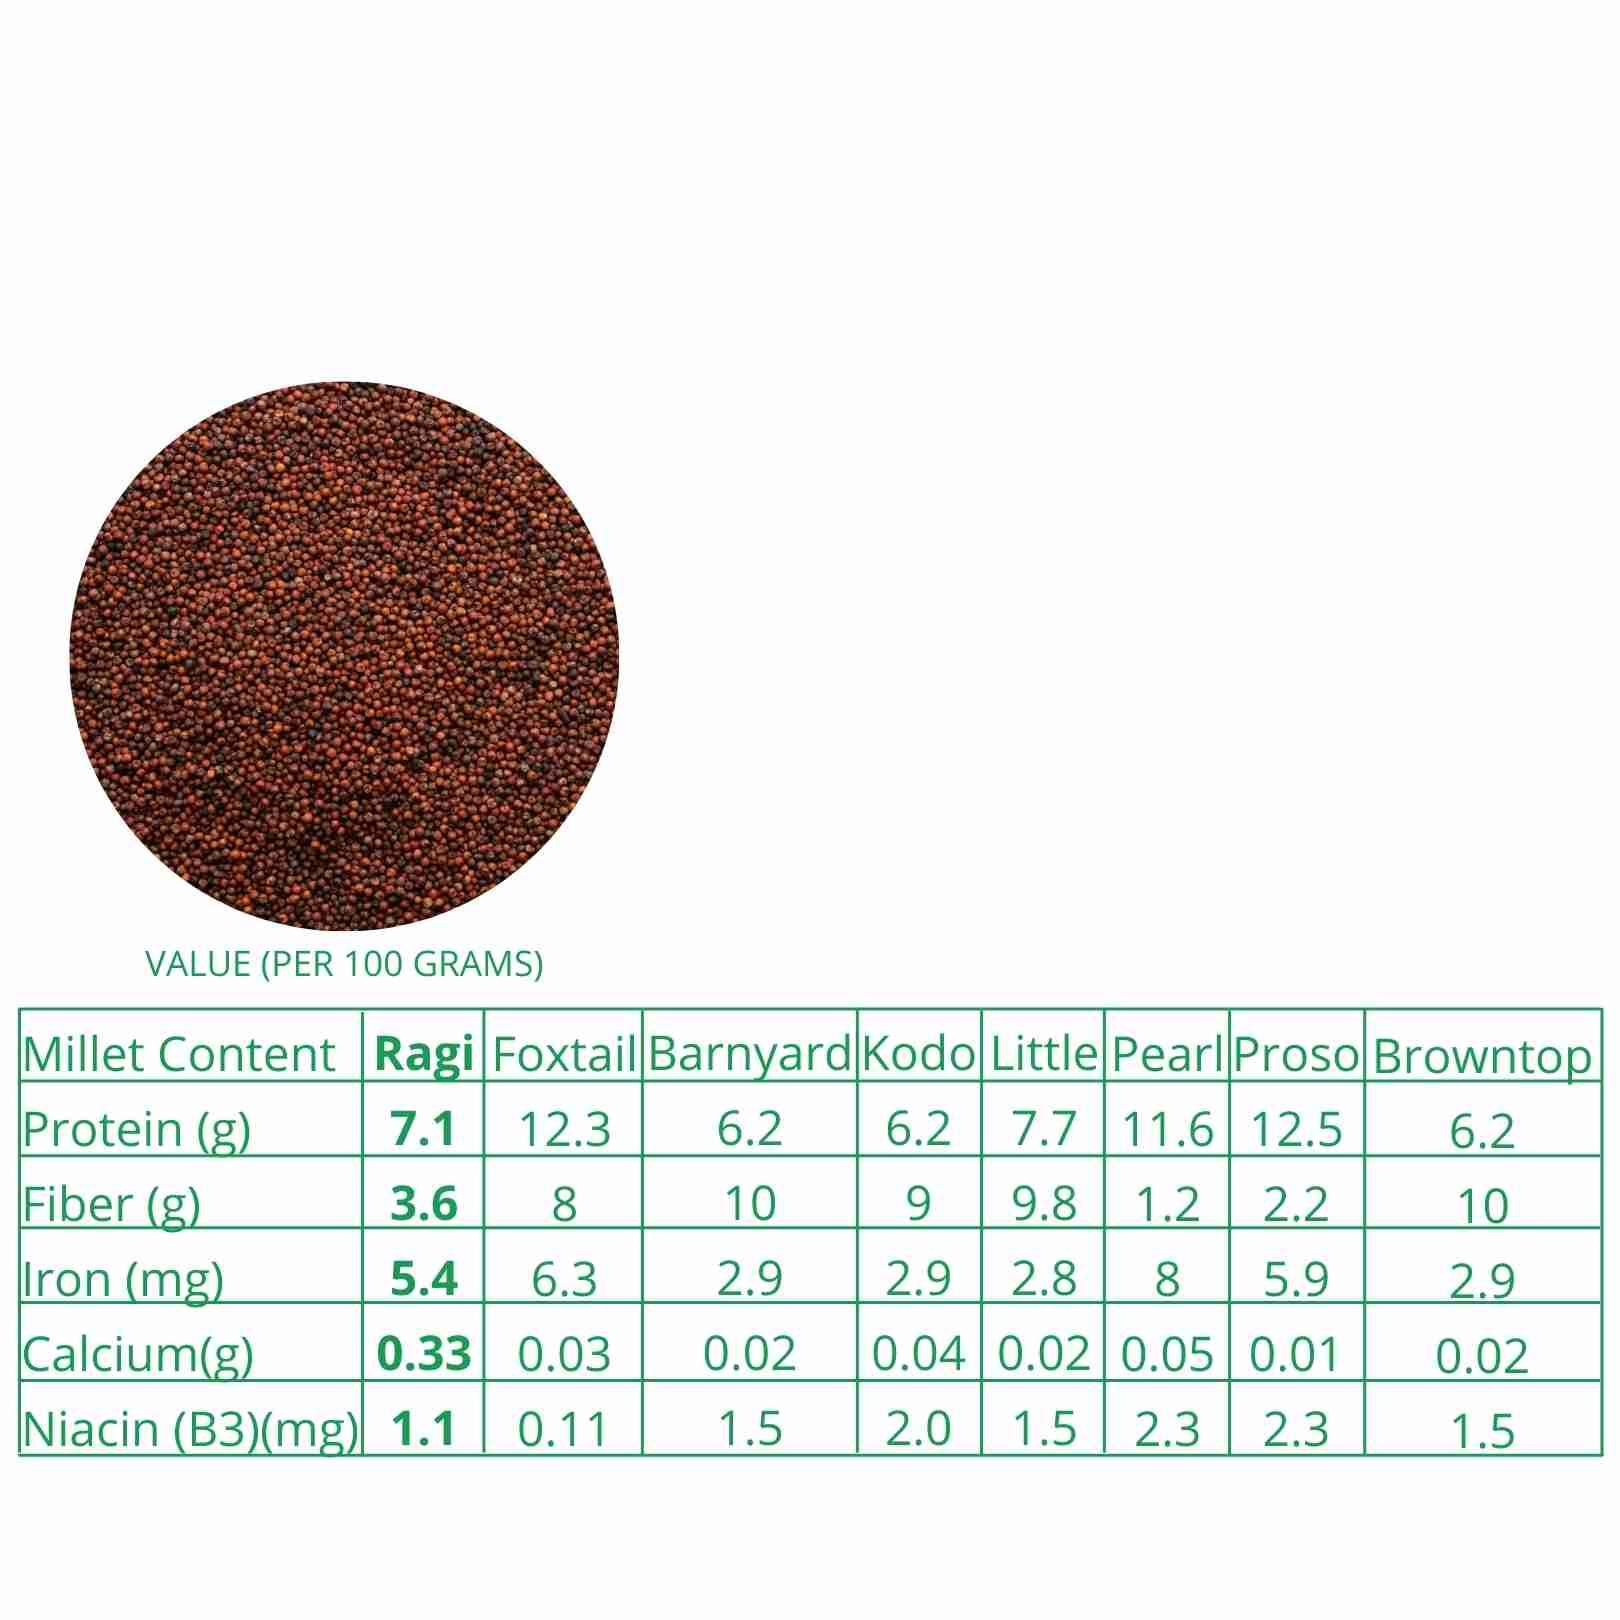 Millet Amma’s Organic Ragi Millet- Our organic Ragi Millet is rich in calcium, fiber, minerals and amino acids. Unpolished Ragi Millet, is a high source of Calcium- it contains over 3 times more calcium than milk.  Ragi Millet is an ideal option for people trying to control their intense glucose levels. It is also loaded with antioxidants making it a natural relaxant. Ragi helps you feel full for longer, has a low glycemic index and is good for regulating your sugar levels.